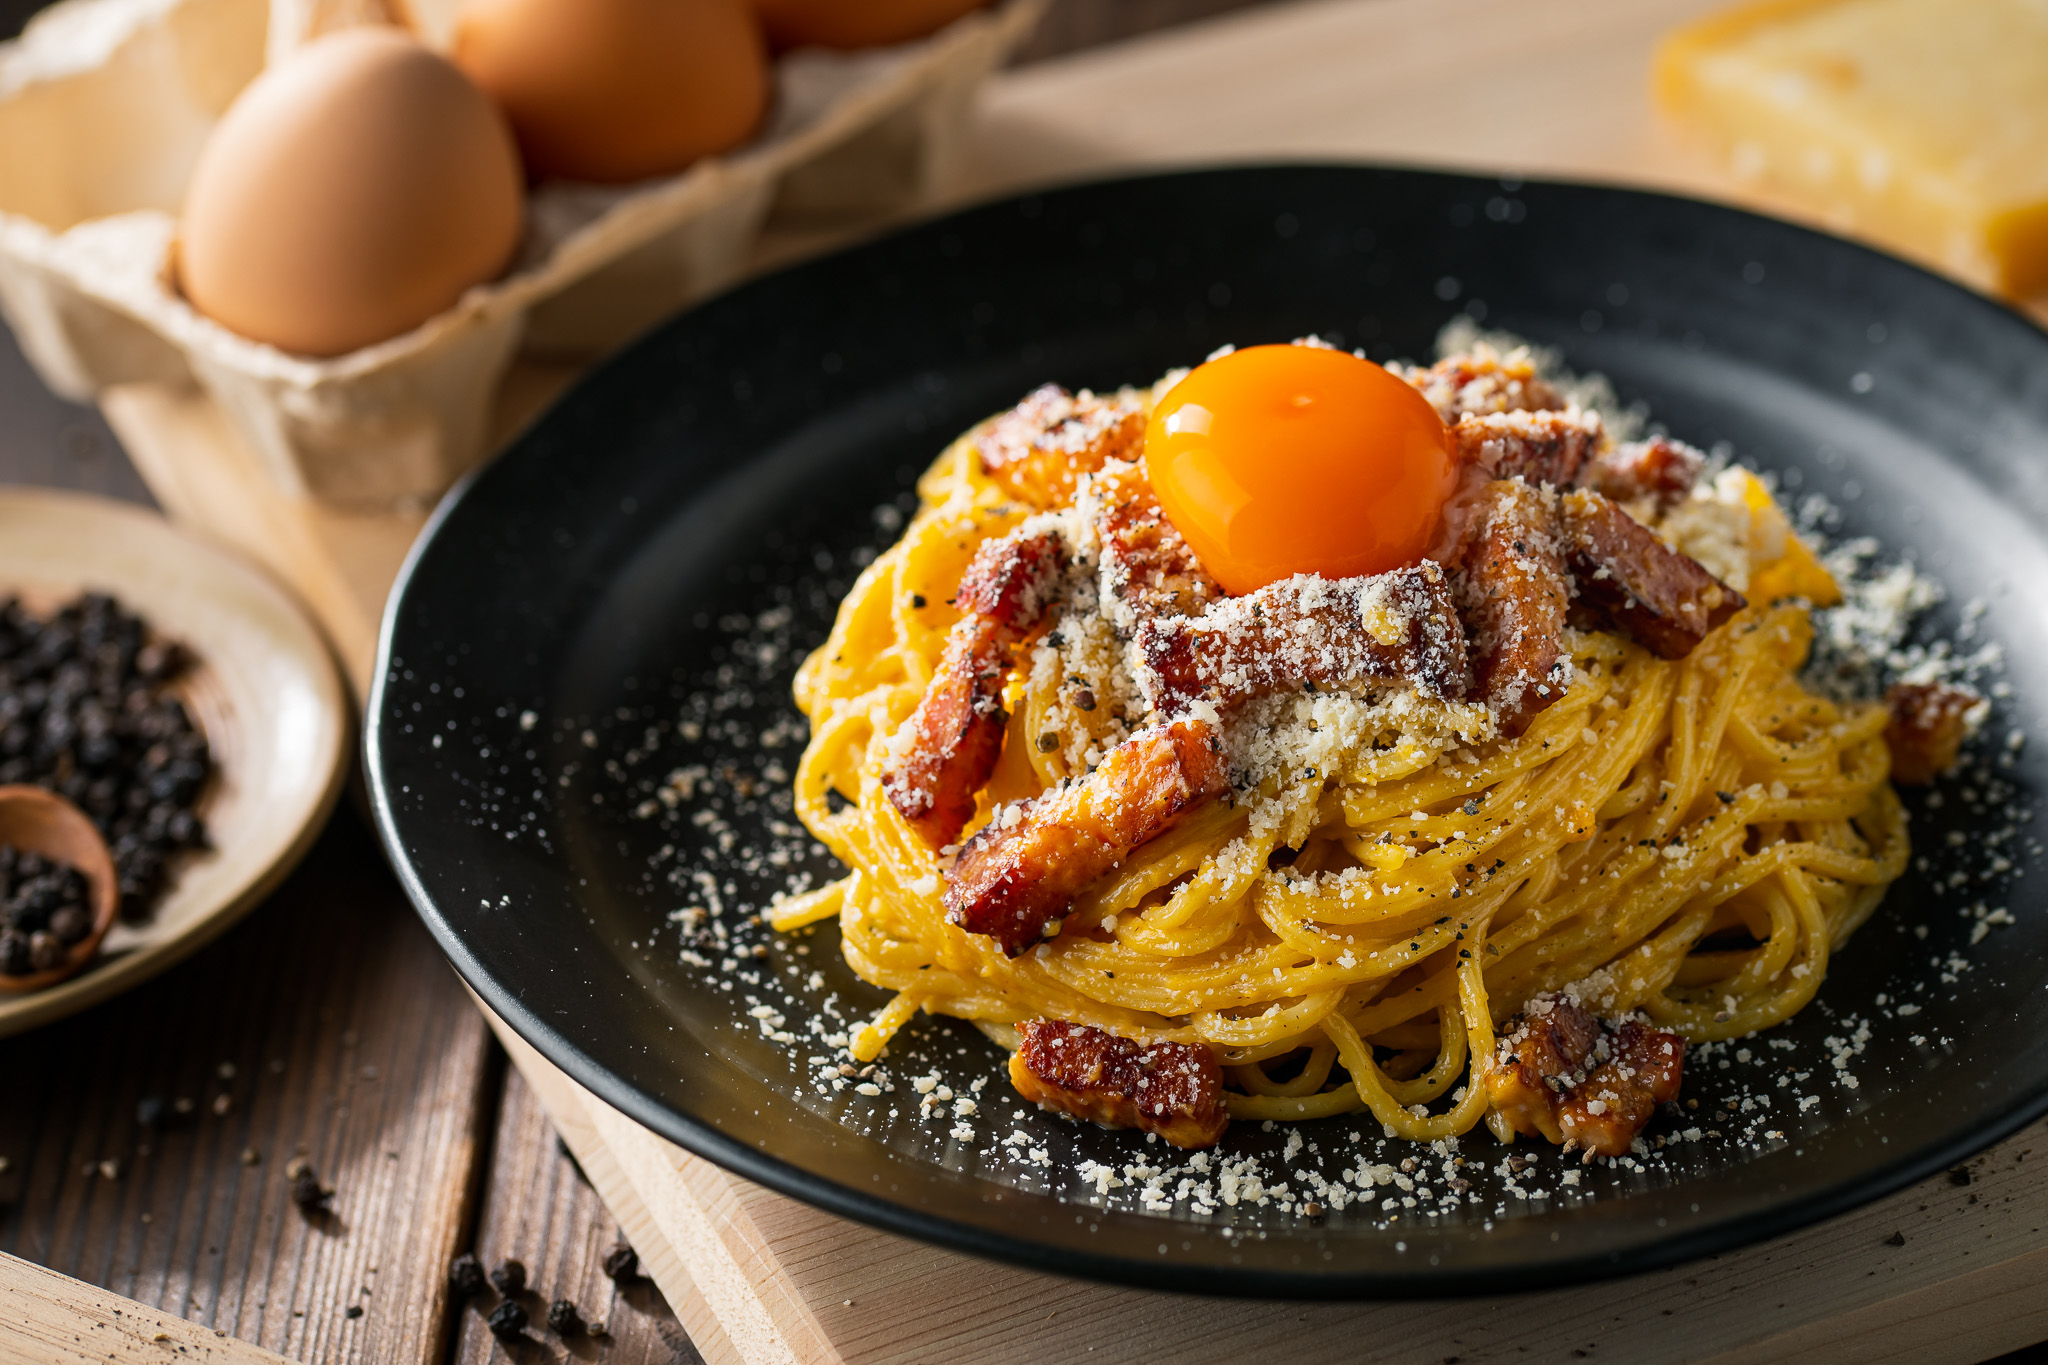 Carbonara pasta with an egg yolk sitting on top of a bed of spaghetti noodles and grated cheese.